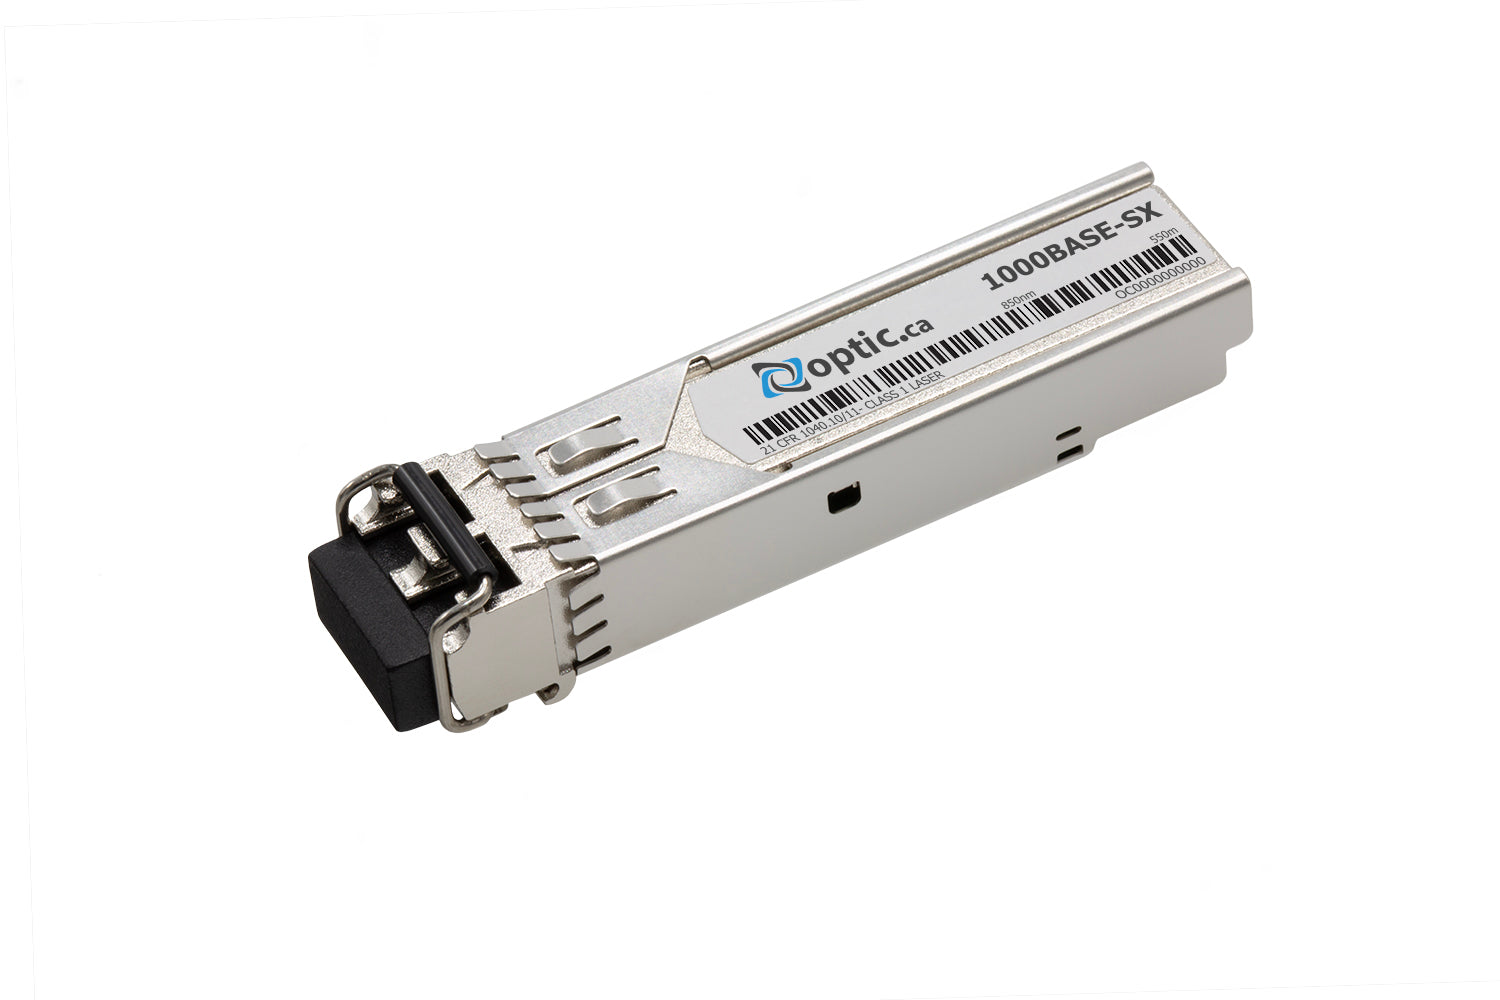 OPTIC.CA - 1000BASE-SX SFP - AT-SPSX-OC - ALLIED TELESIS COMPATIBLE